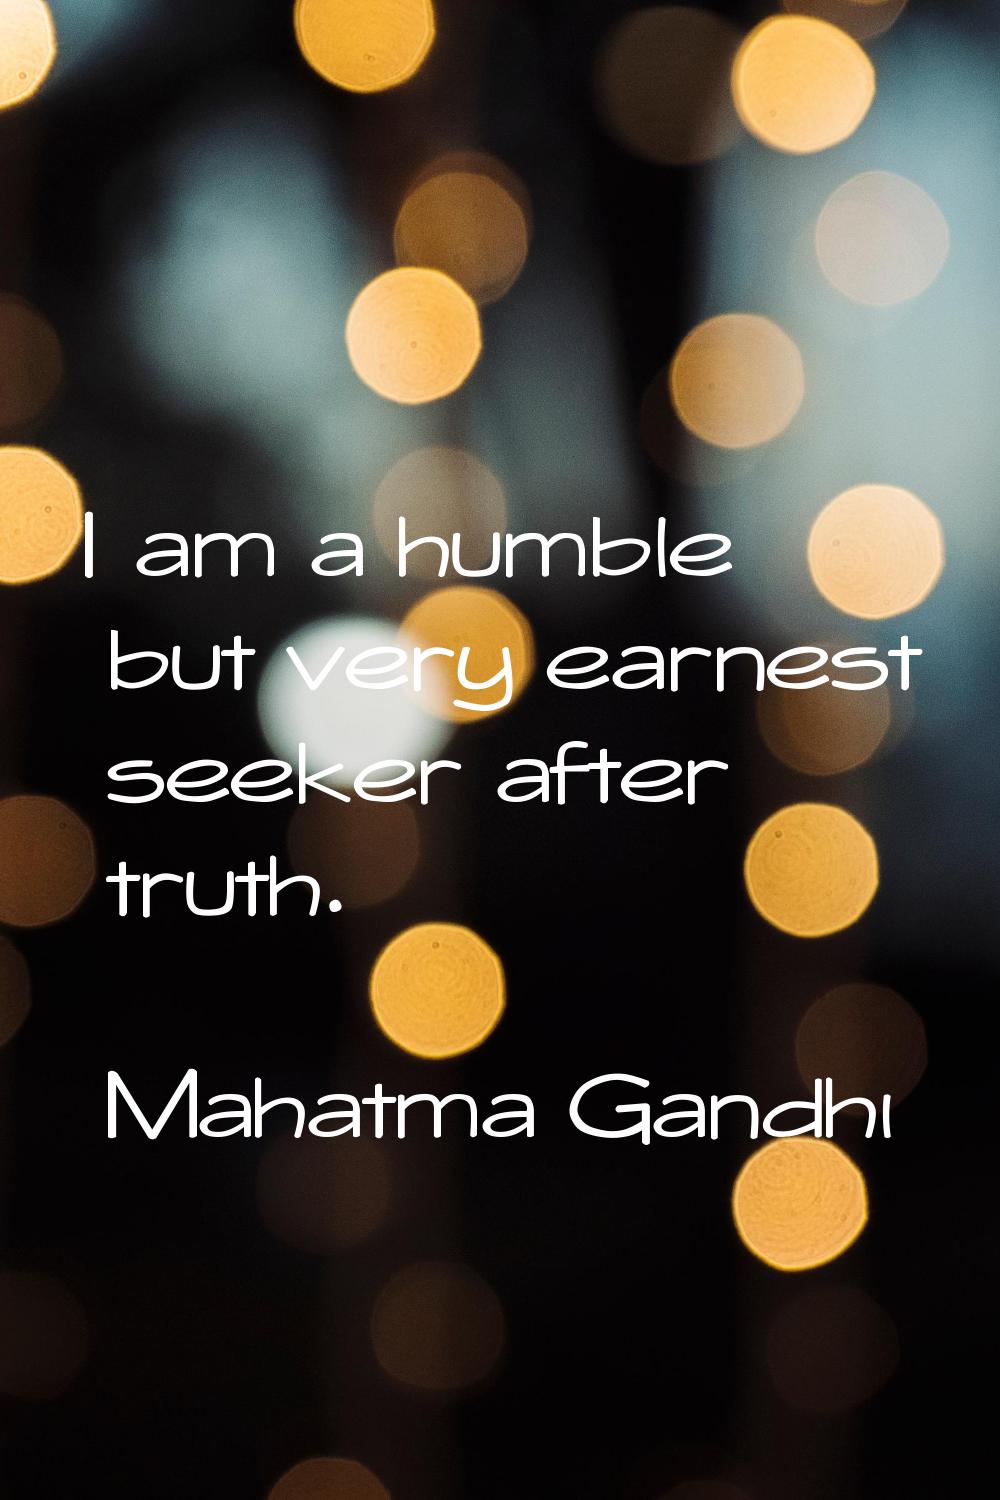 I am a humble but very earnest seeker after truth.